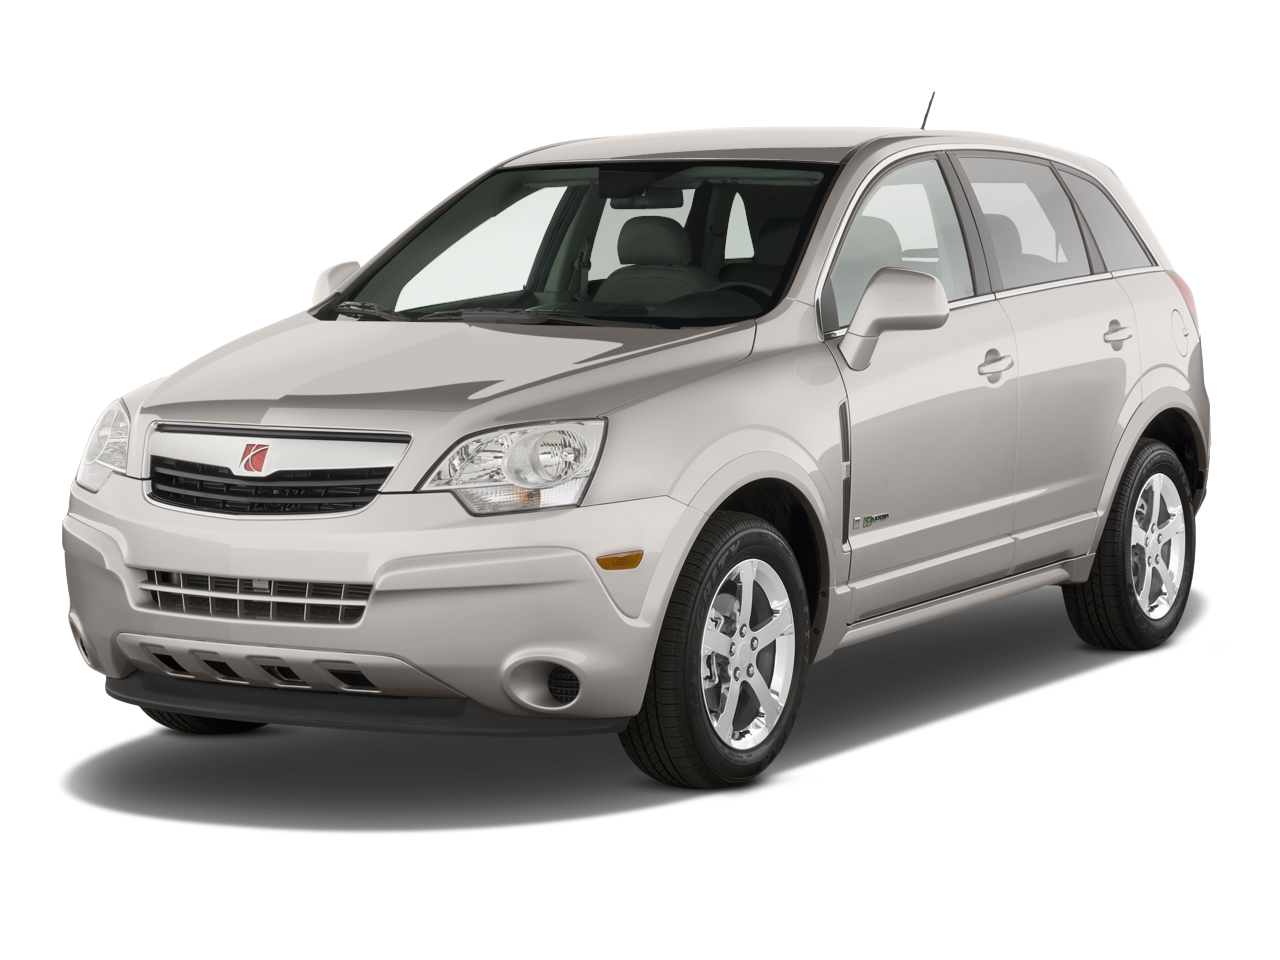 2009 Saturn VUE Prices, Reviews, and Photos - MotorTrend